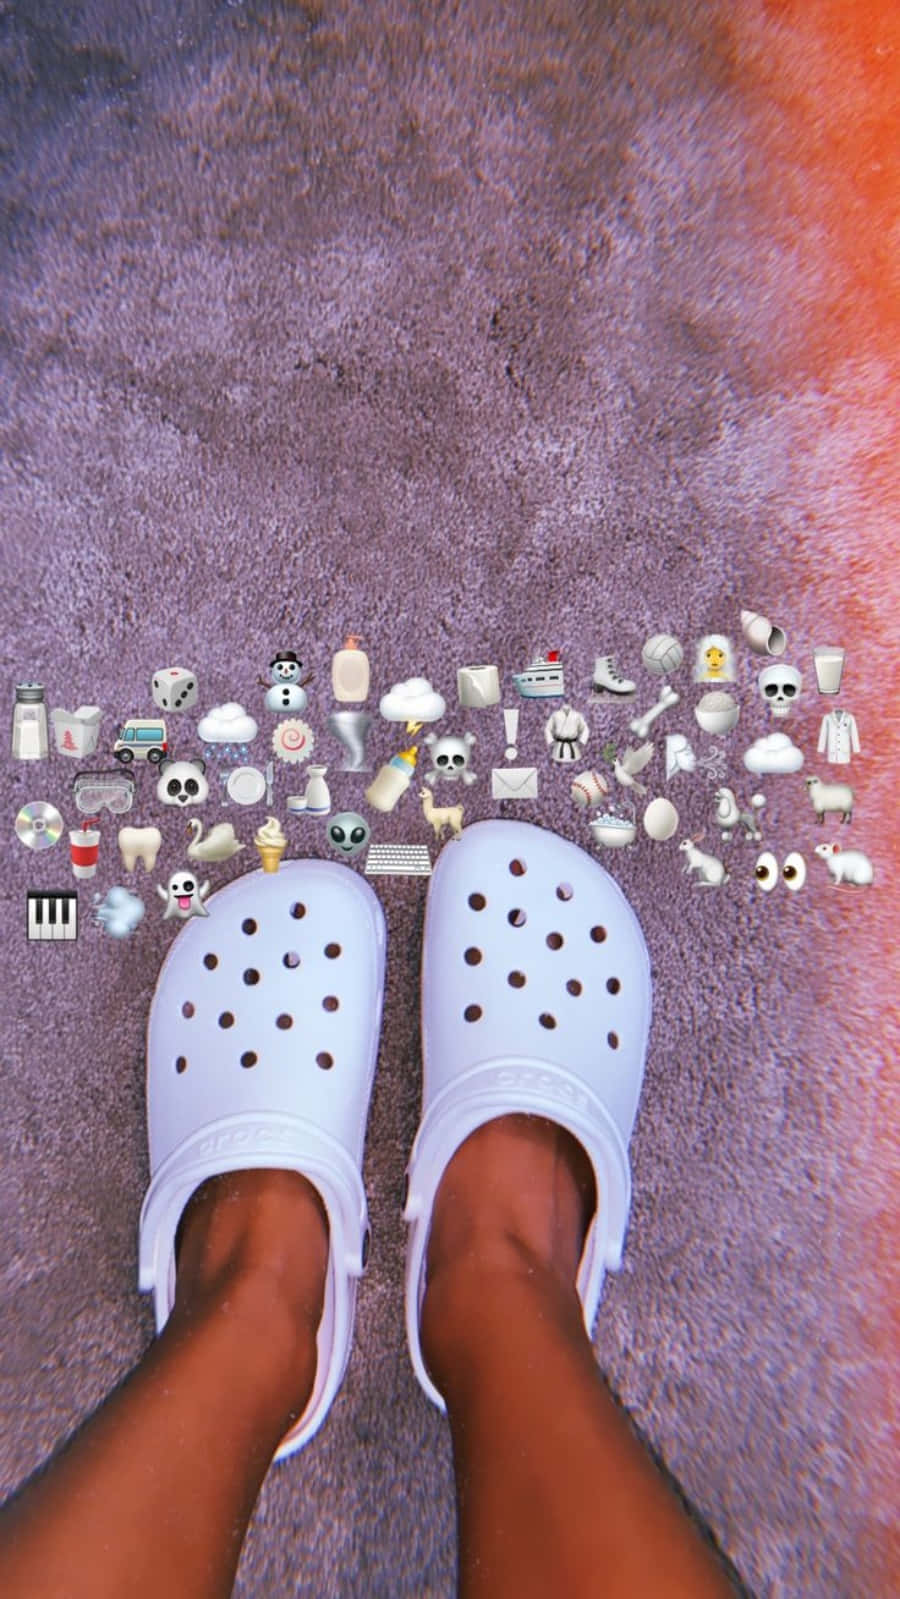 Find your perfect fit with Crocs